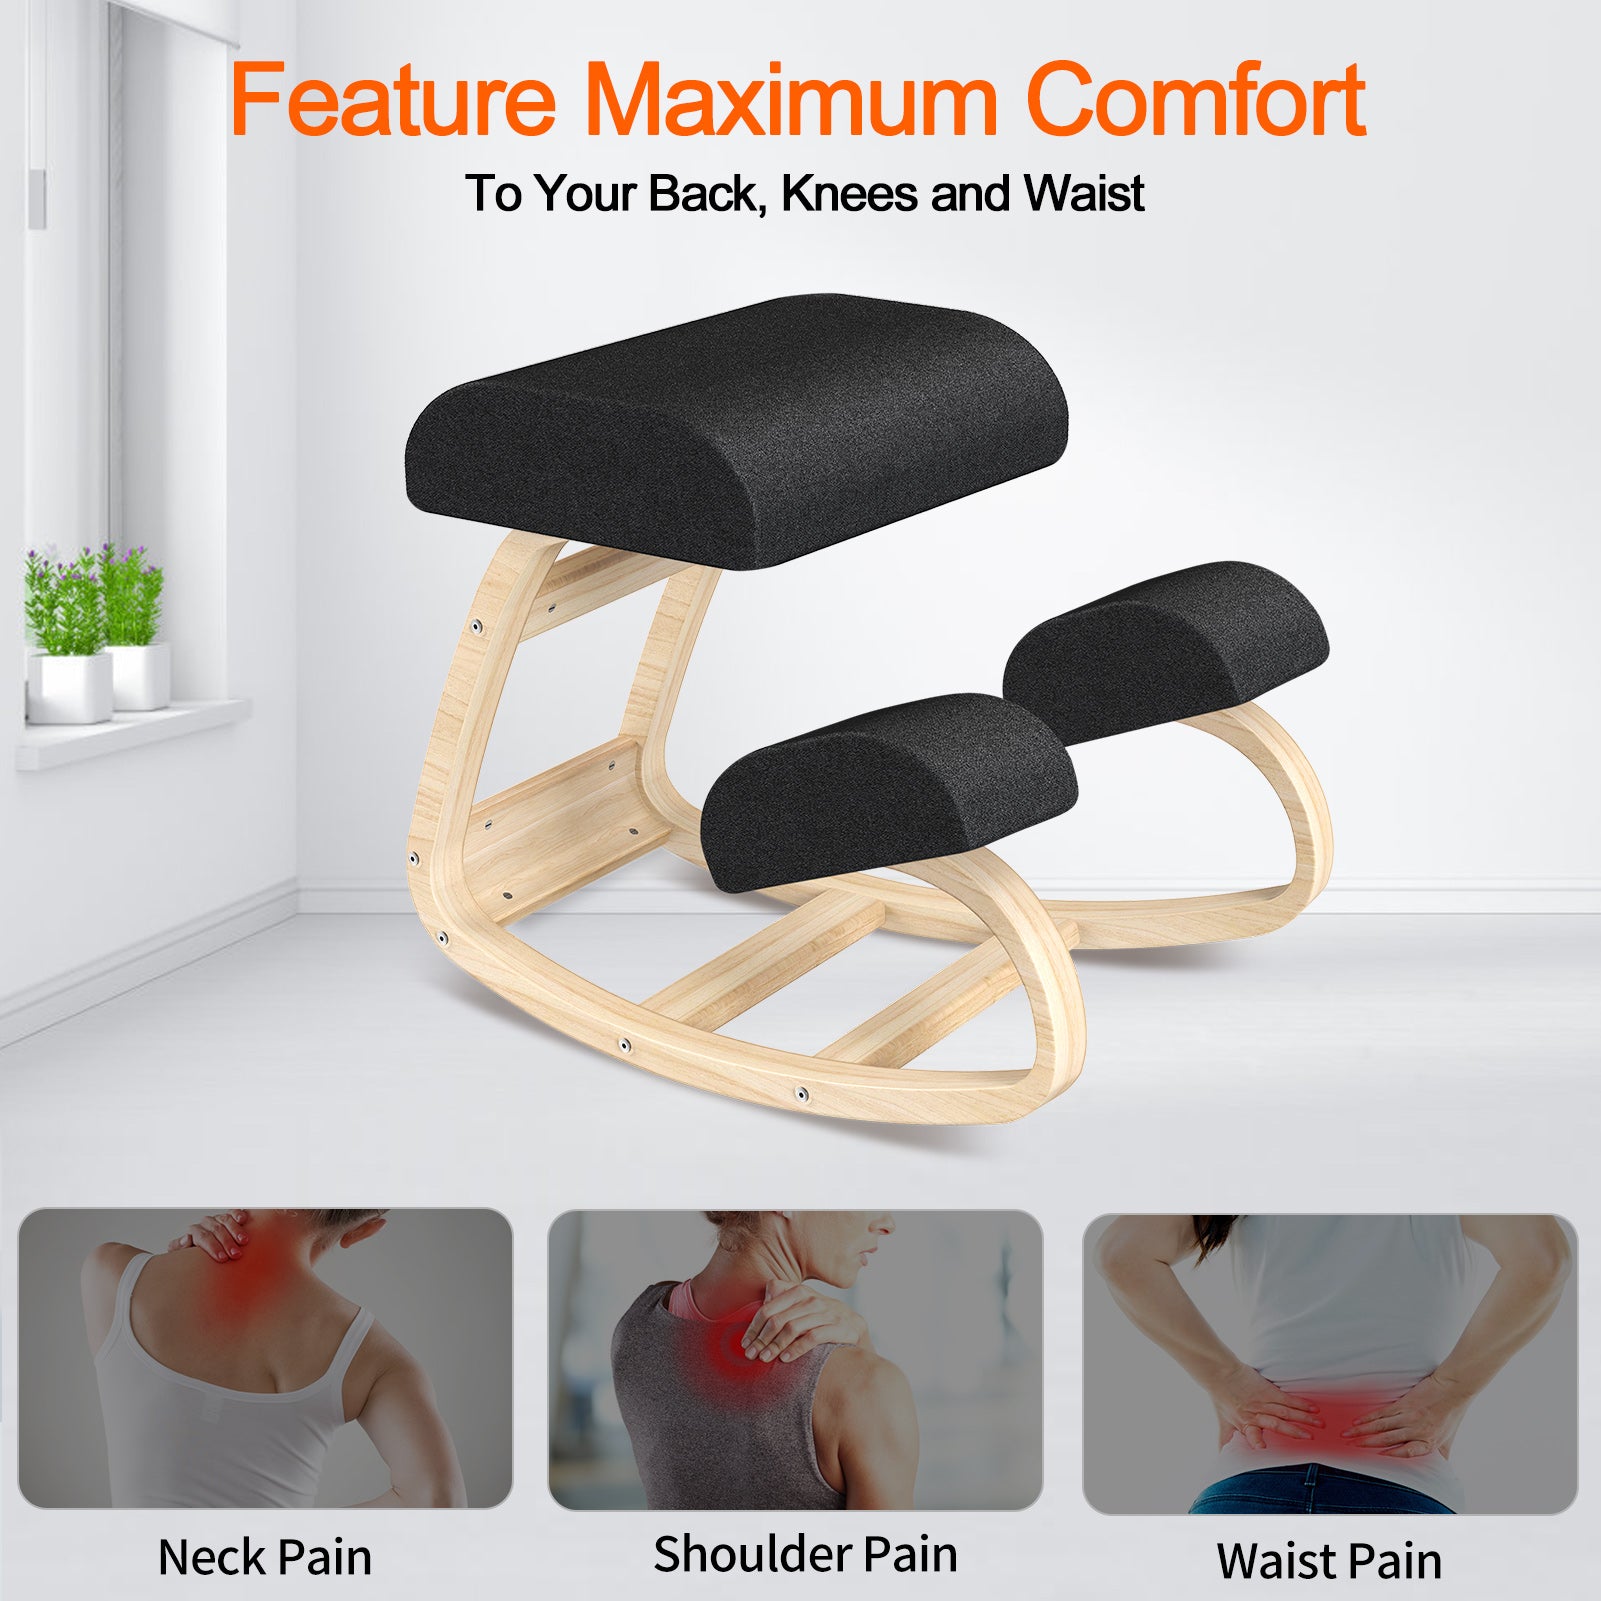 knee chair brings maximum comfort to your back, knees, and waist